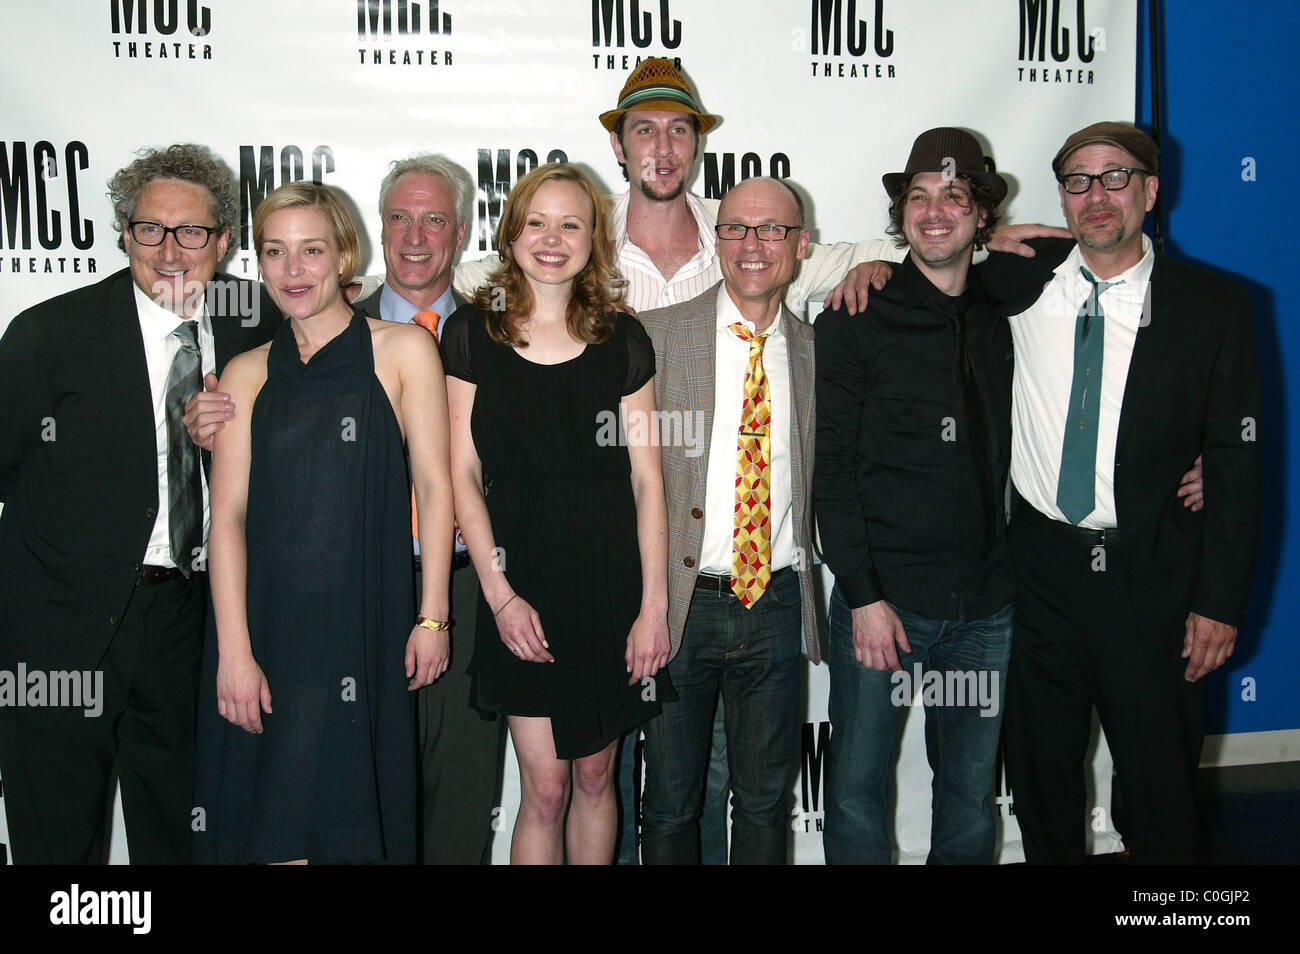 Bernard Telsey, Piper Perabo, Robert LuPone, Alison Pill, Pablo Schreiber, Thomas Sadoski and Terry Kinney Opening Night After Stock Photo